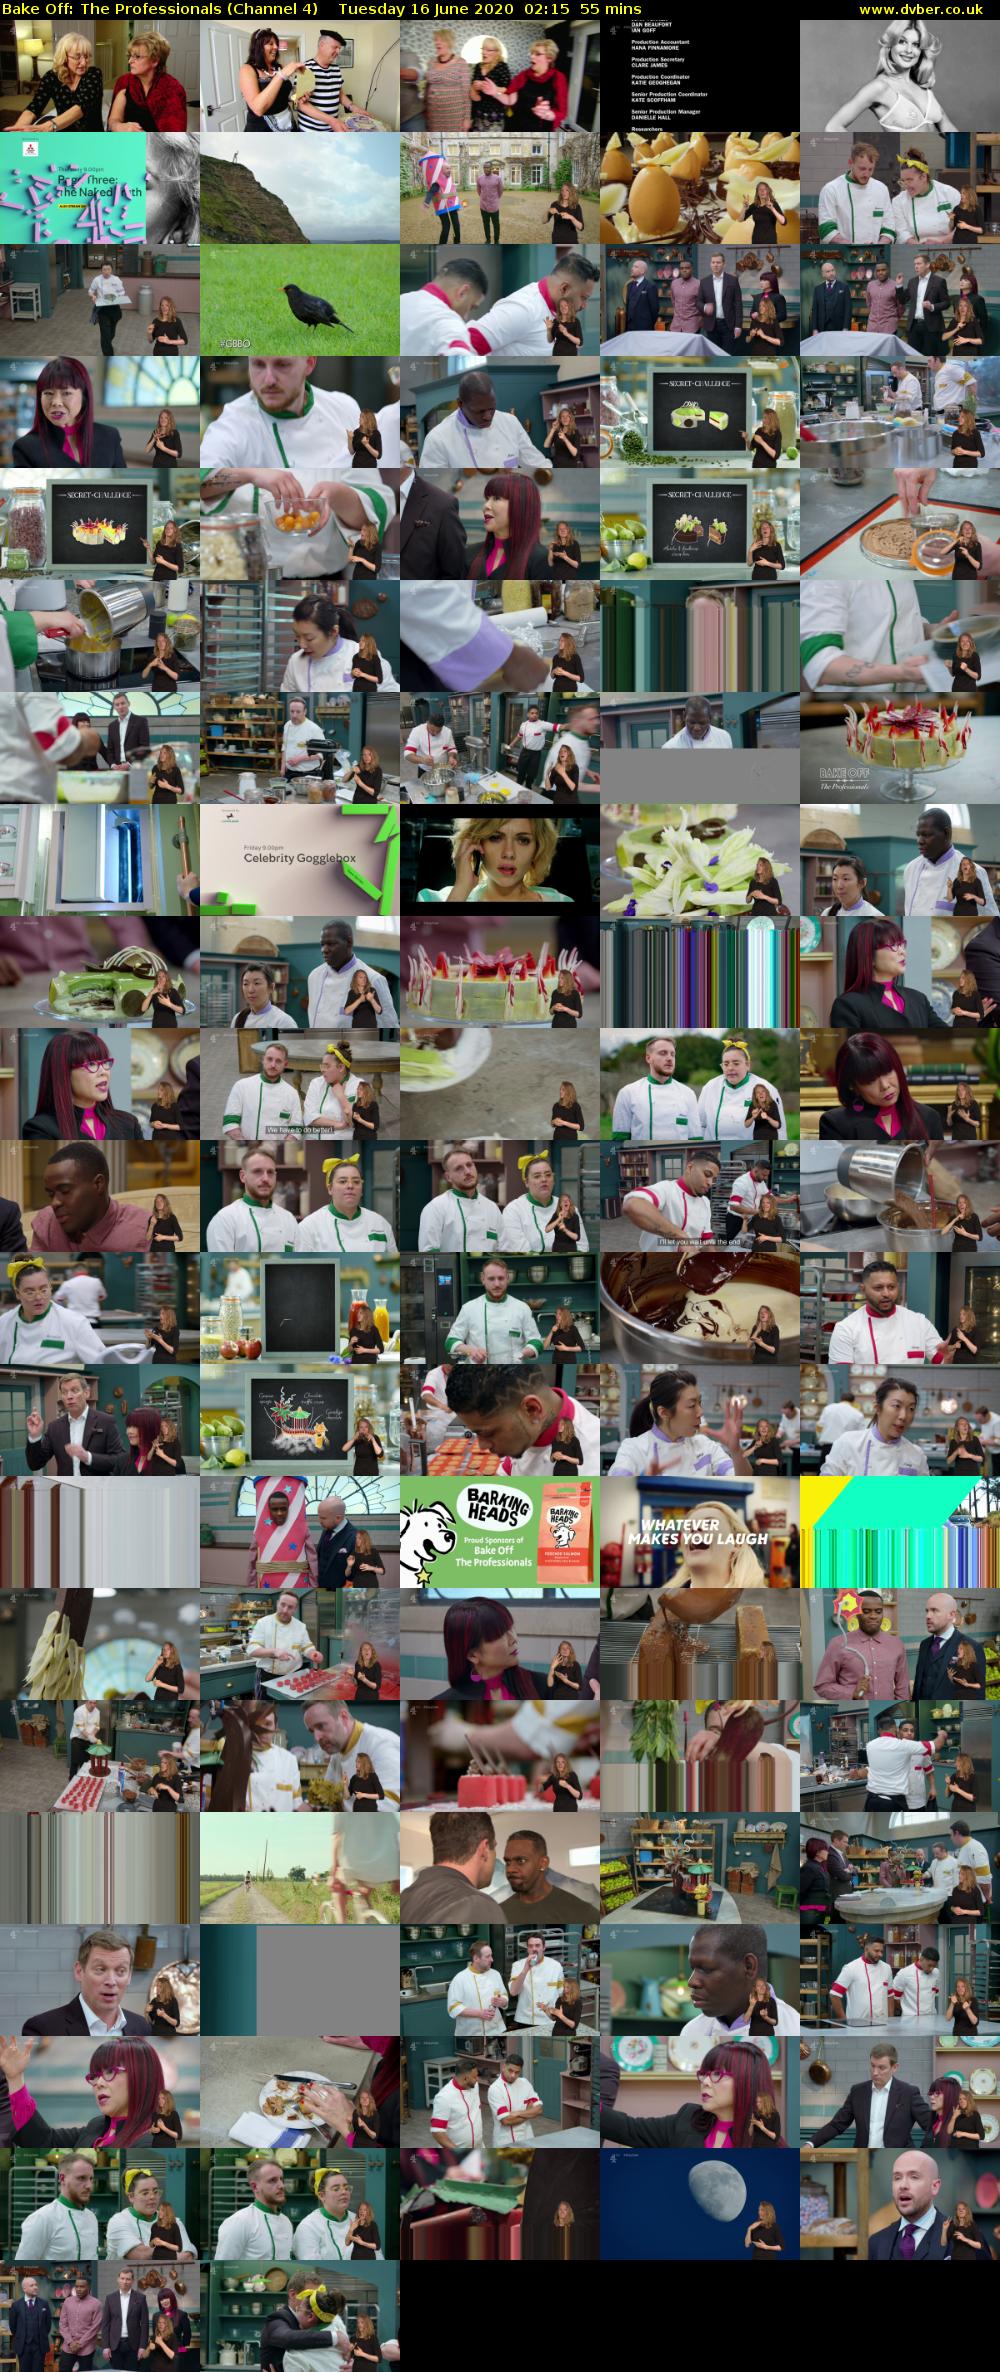 Bake Off: The Professionals (Channel 4) Tuesday 16 June 2020 02:15 - 03:10